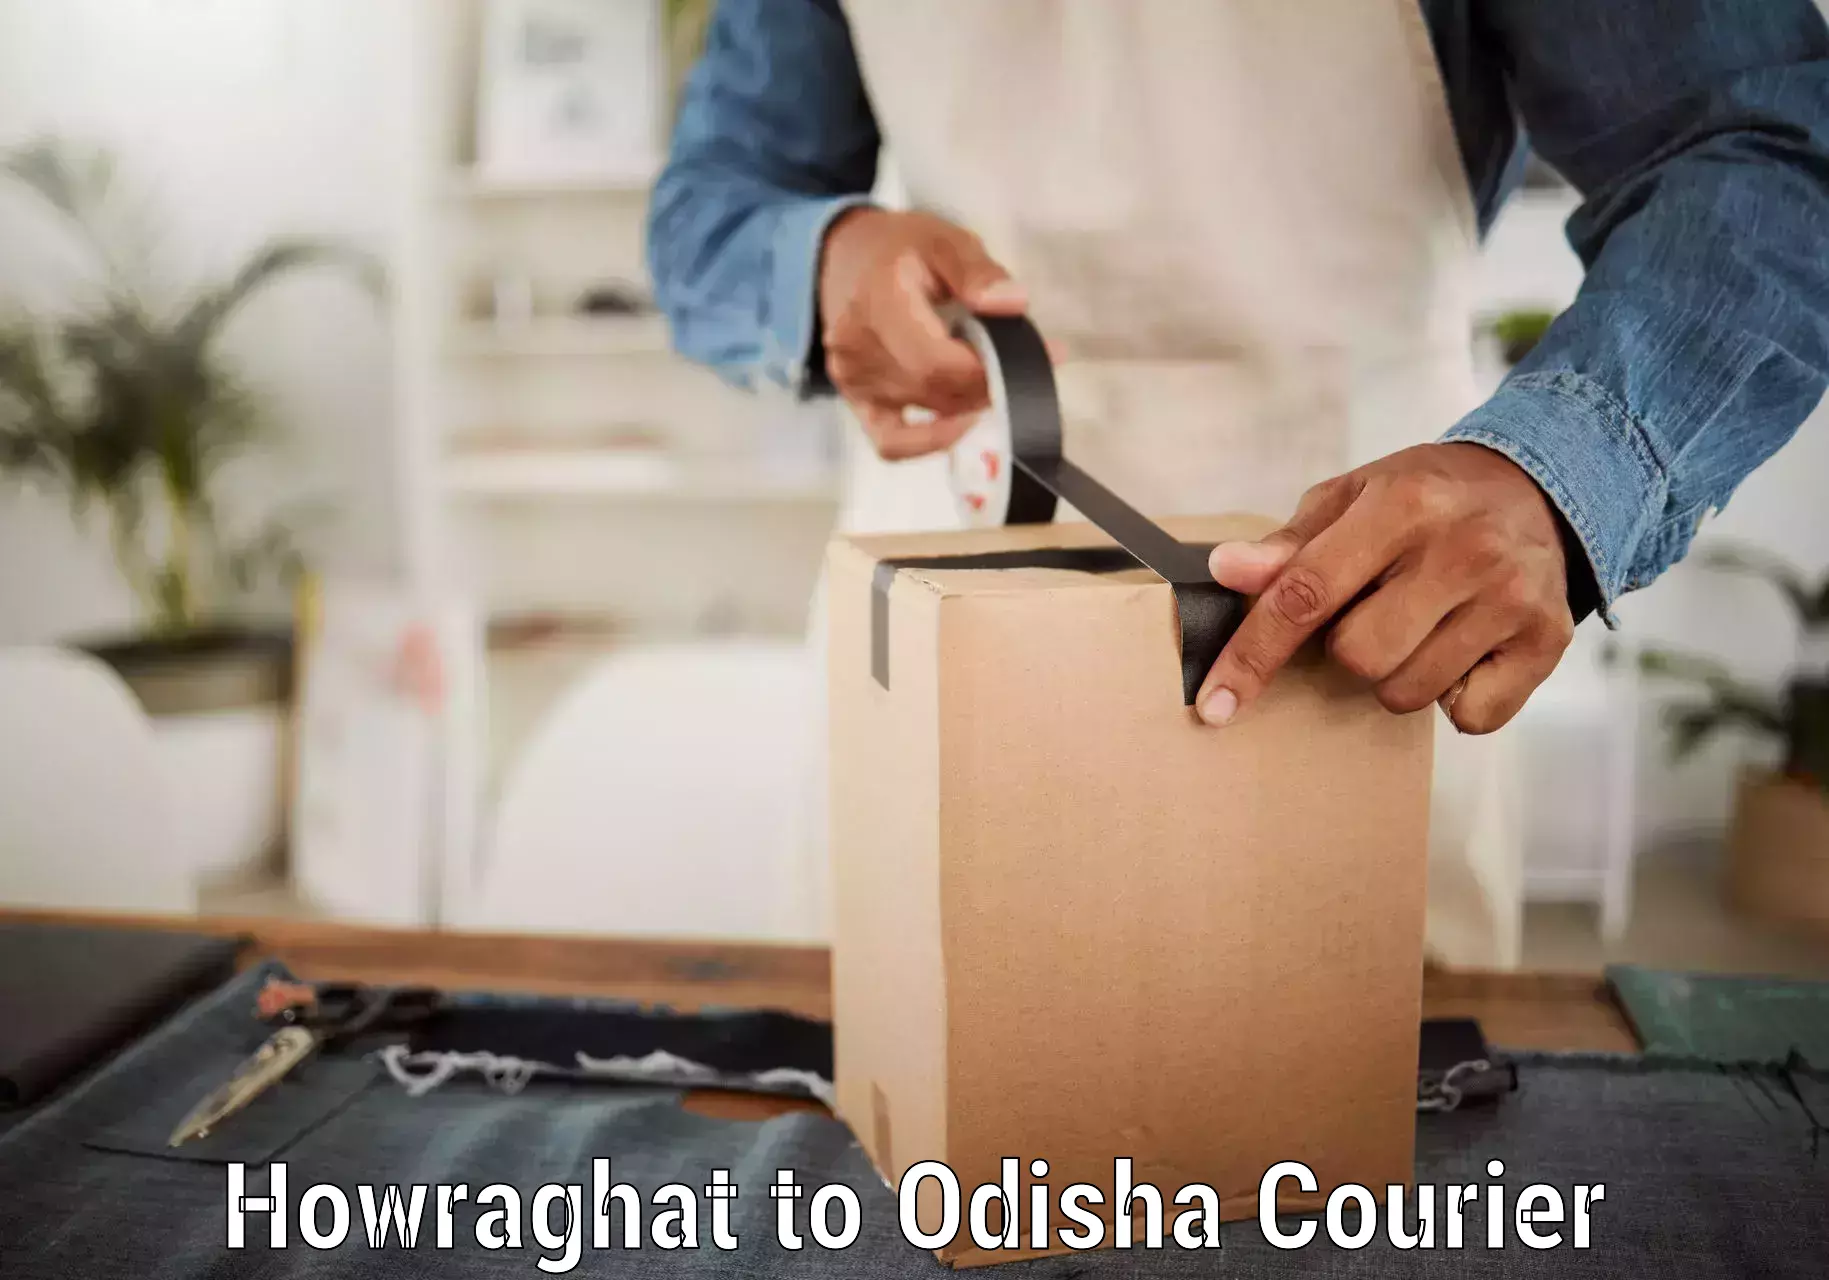 Full-service courier options Howraghat to Agarpada